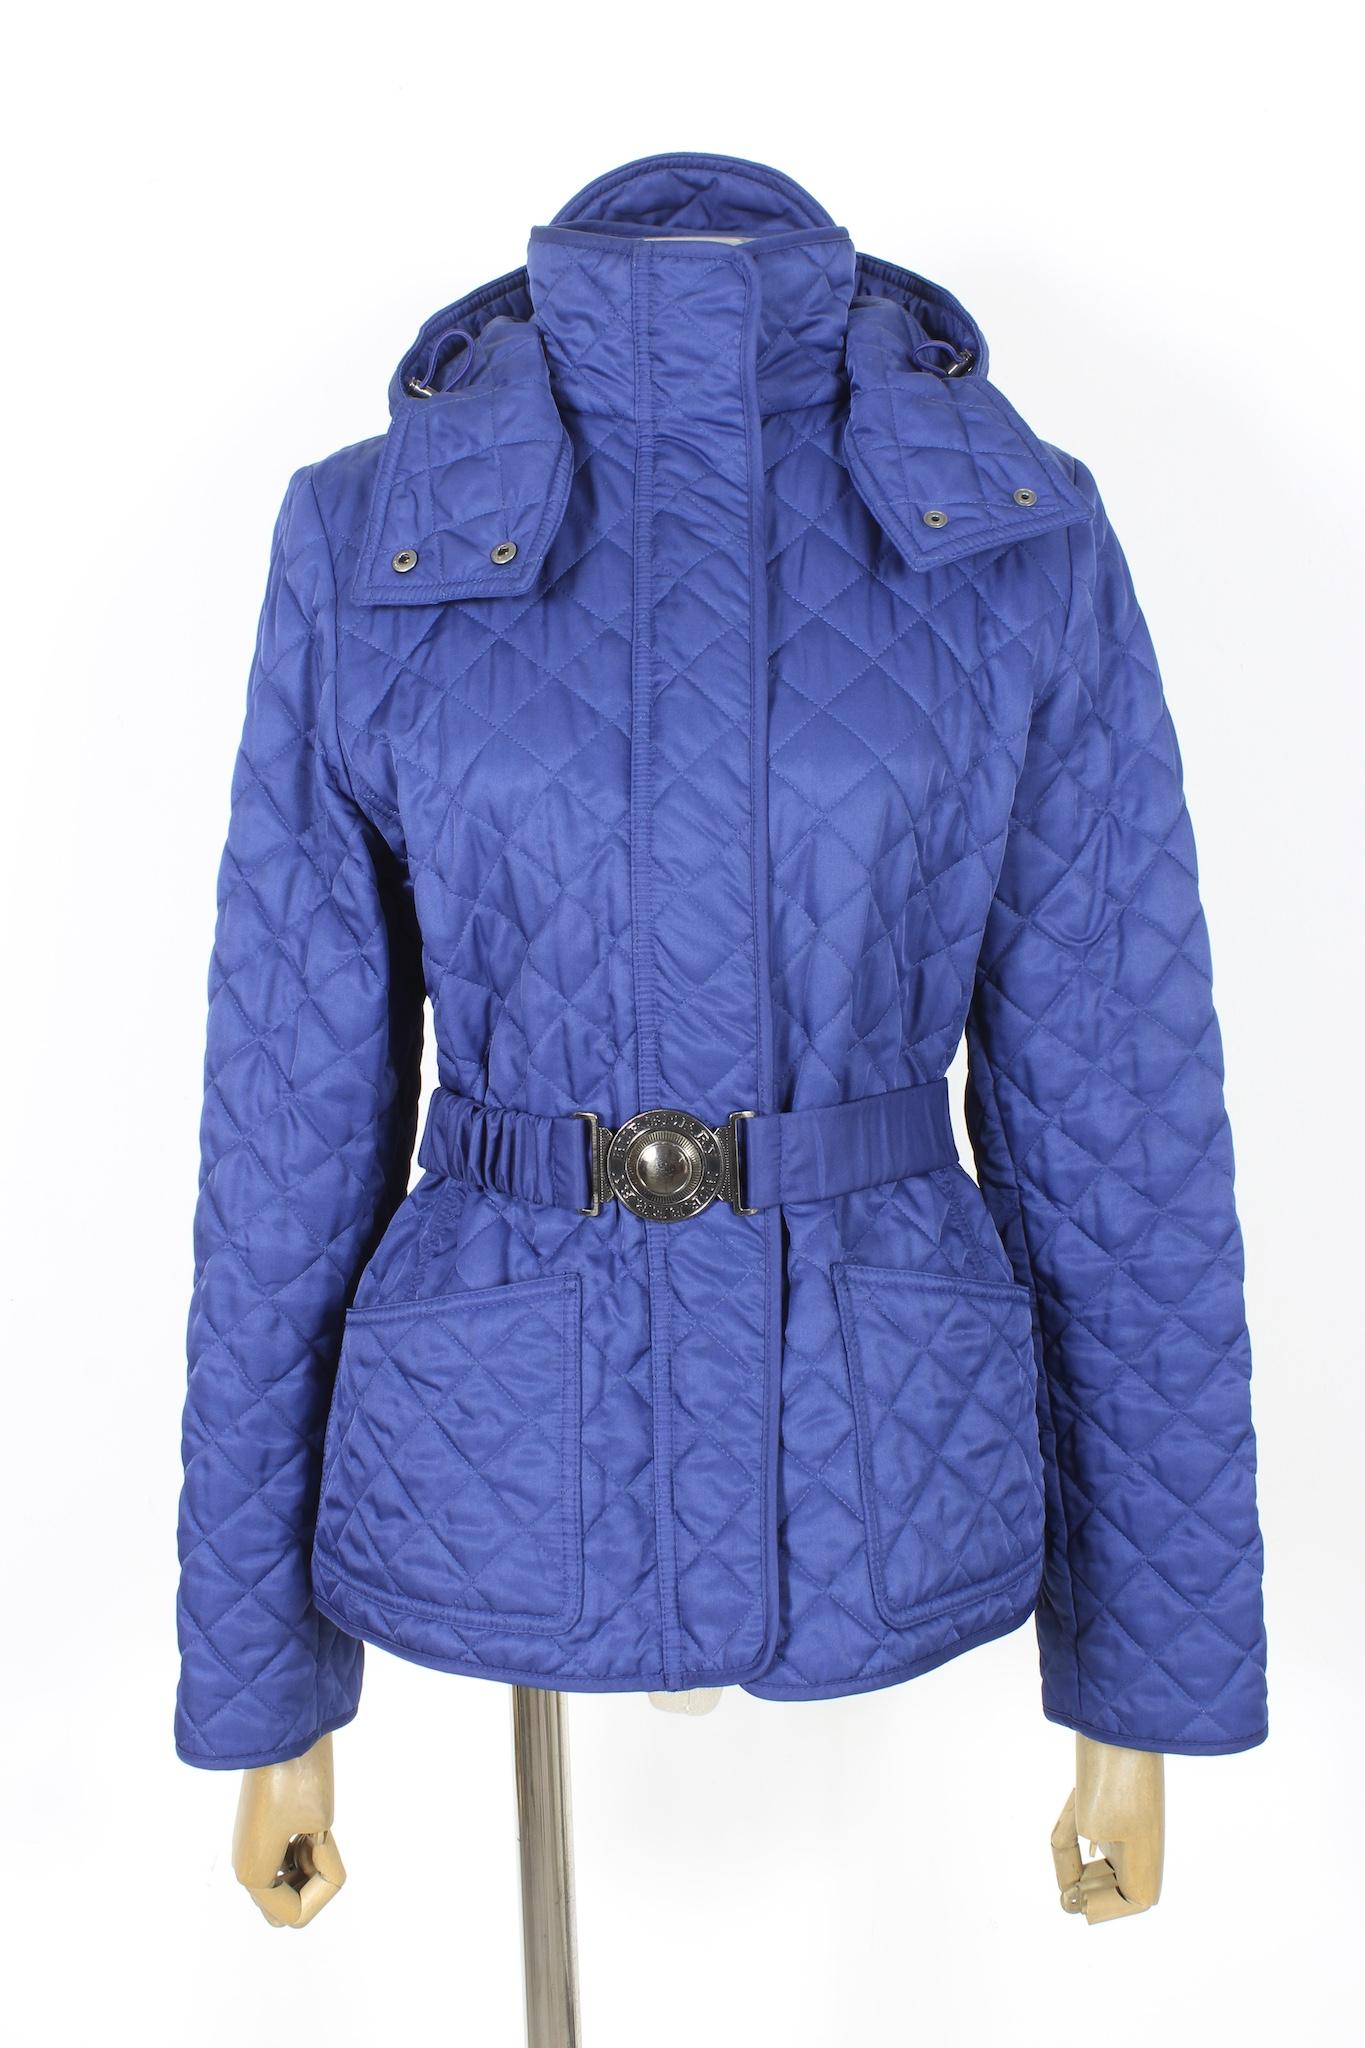 Burberry 2000s quilt jacket. Light coat with removable hood, elastic belt at the waist. Zip and button closure. Light blue color. Internally typical Burberry pattern. 100% polyester fabric.

Size: M

Shoulder: 44 cm
Bust/Chest: 48 cm
Sleeve: 60